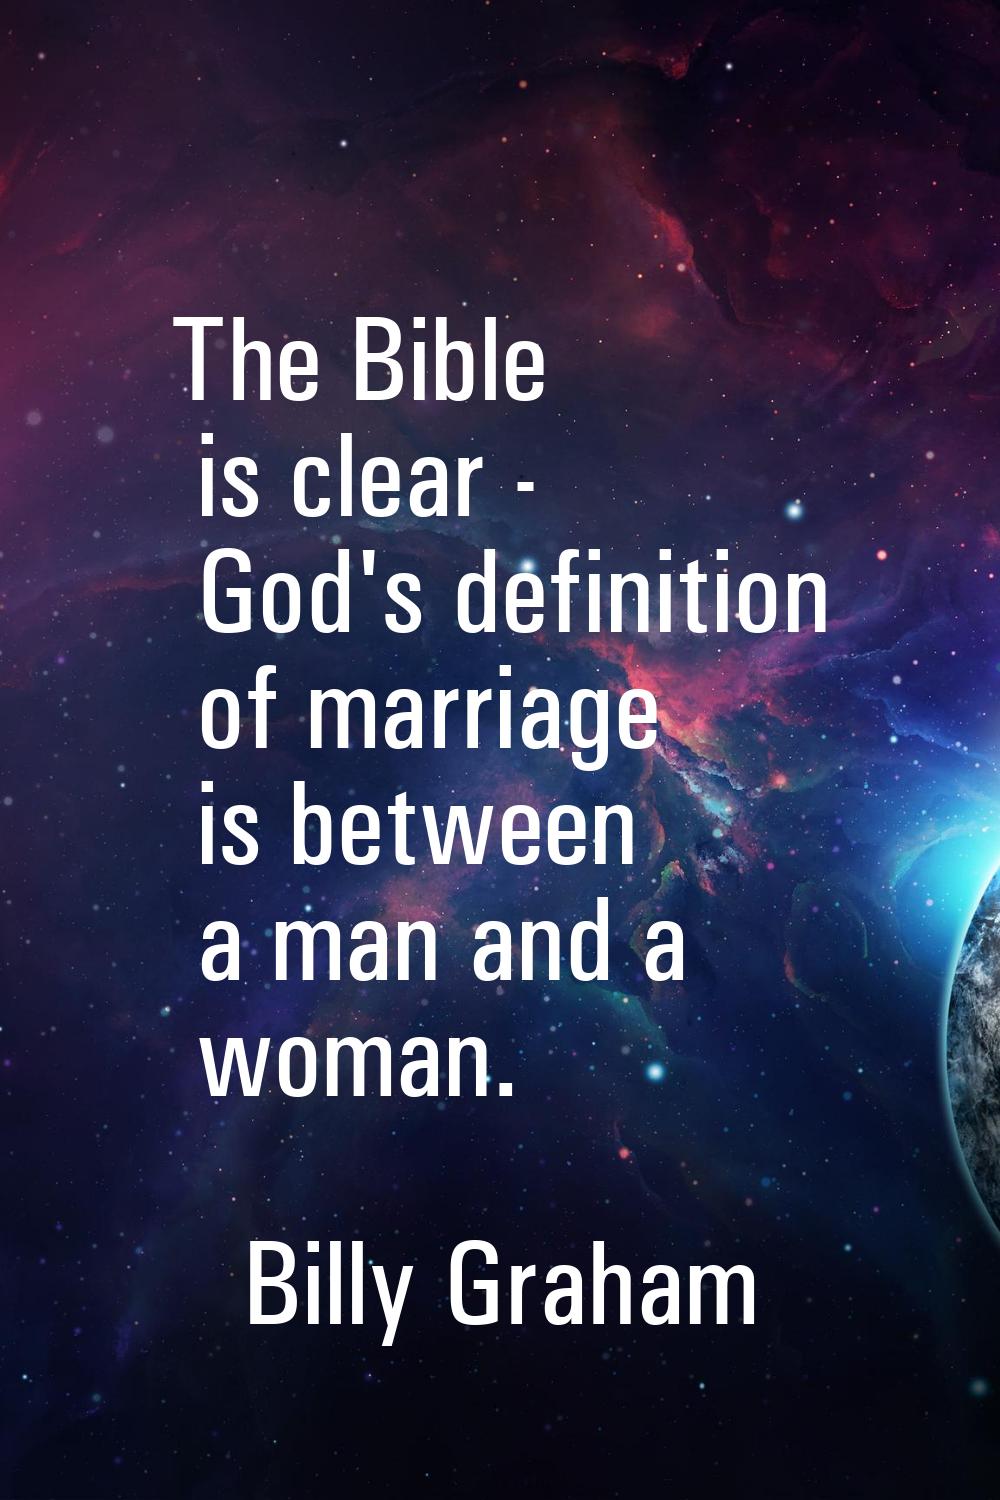 The Bible is clear - God's definition of marriage is between a man and a woman.